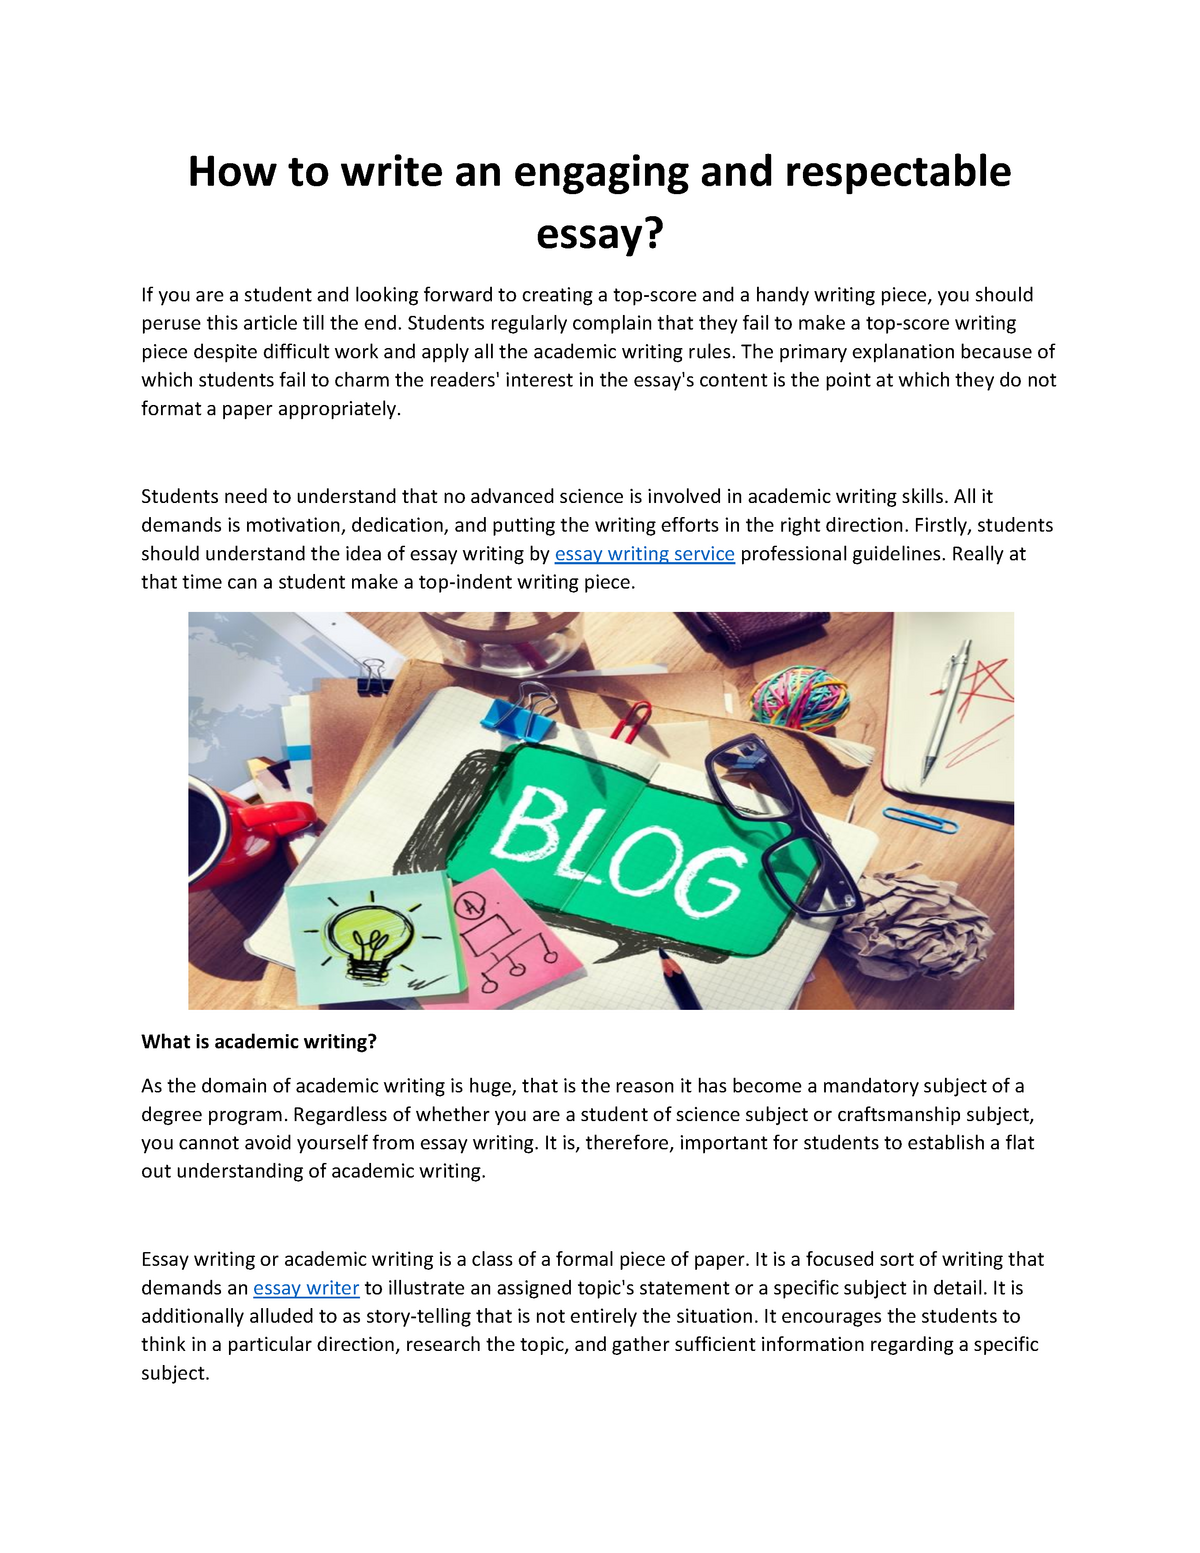 25.How to write an engaging and respectable essay-converted - WRI